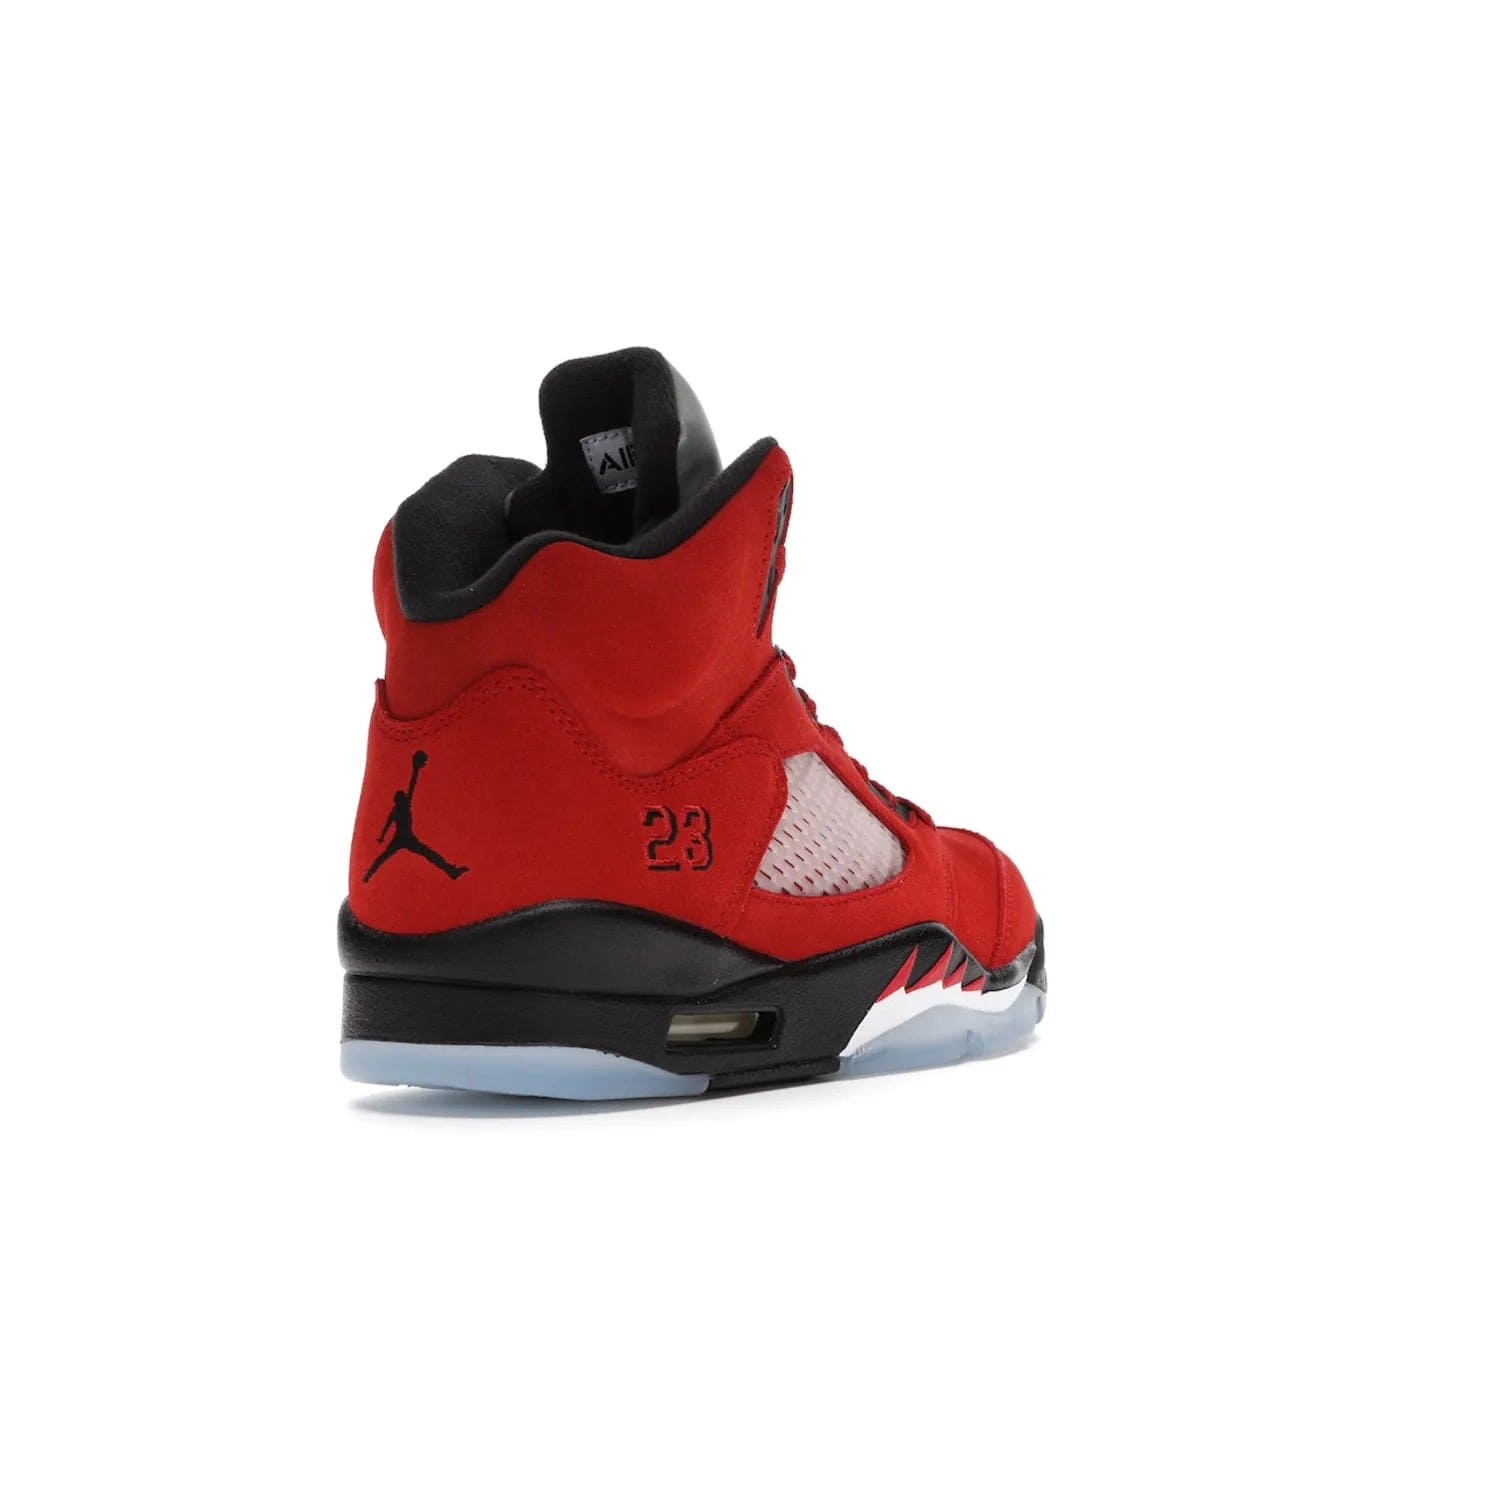 Jordan 5 Retro Raging Bull Red (2021) - Image 31 - Only at www.BallersClubKickz.com - Get ready for the 2021 stand-alone release of the Air Jordan 5 Raging Bulls! This all-suede upper combines luxe details like a Jumpman logo, red & black "23" embroidery and shark tooth detailing, atop a black midsole. Don't miss out - release date in April 2021 for $190.